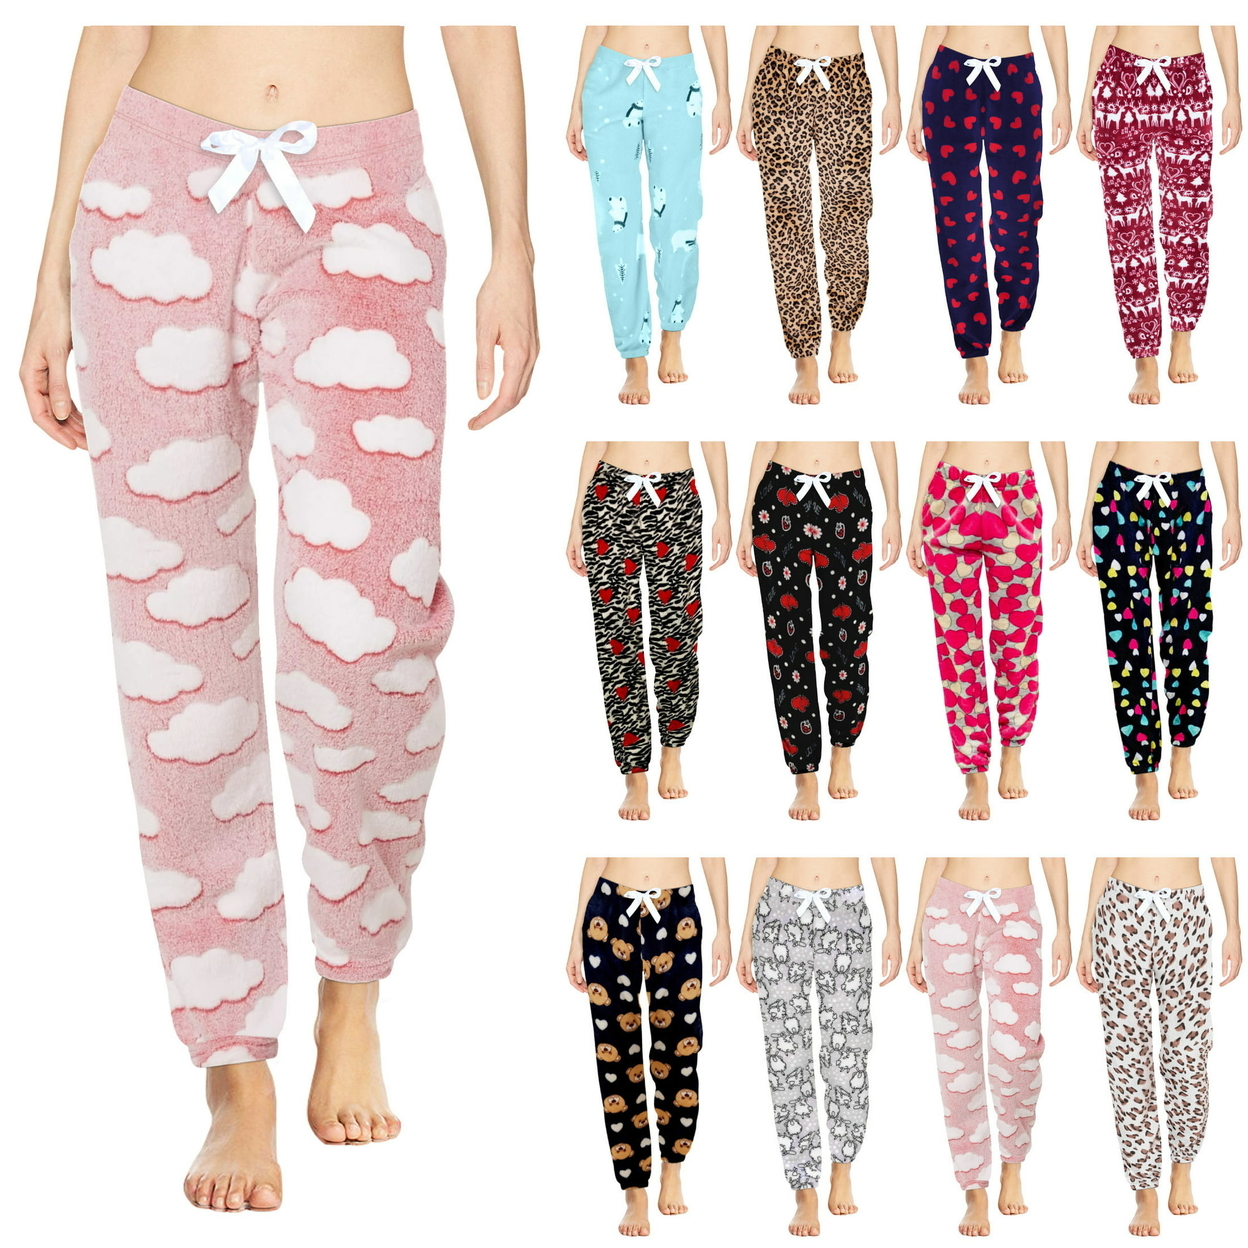 4-Pack: Women's Solid & Printed Ultra-Soft Comfy Stretch Micro-Fleece Pajama Lounge Pants - Small, Animal